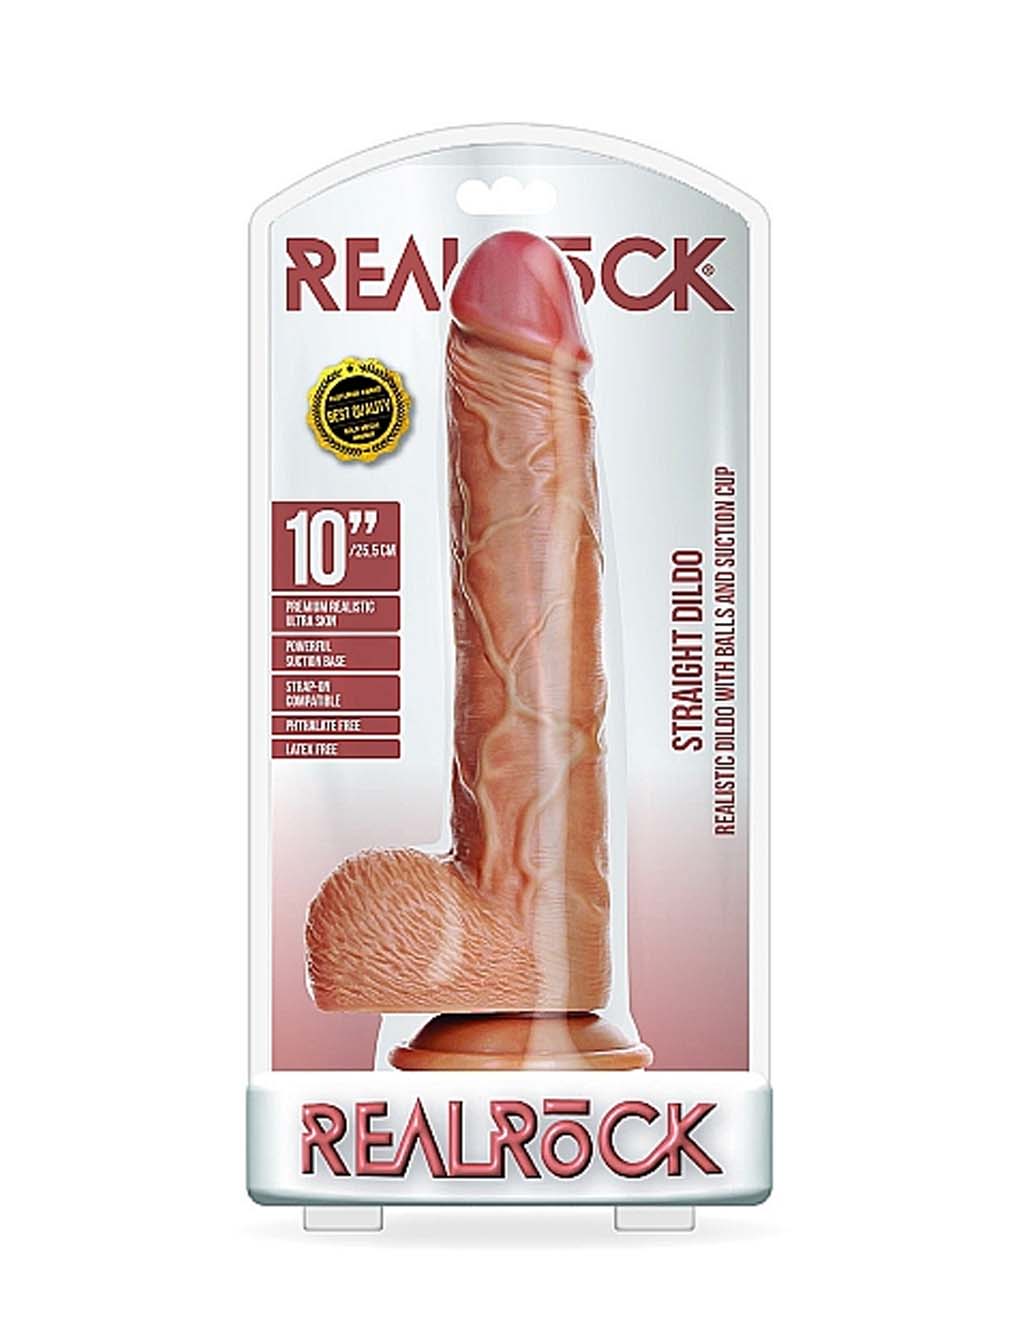 Real Rock Realistic 10" Dong with Balls- Box